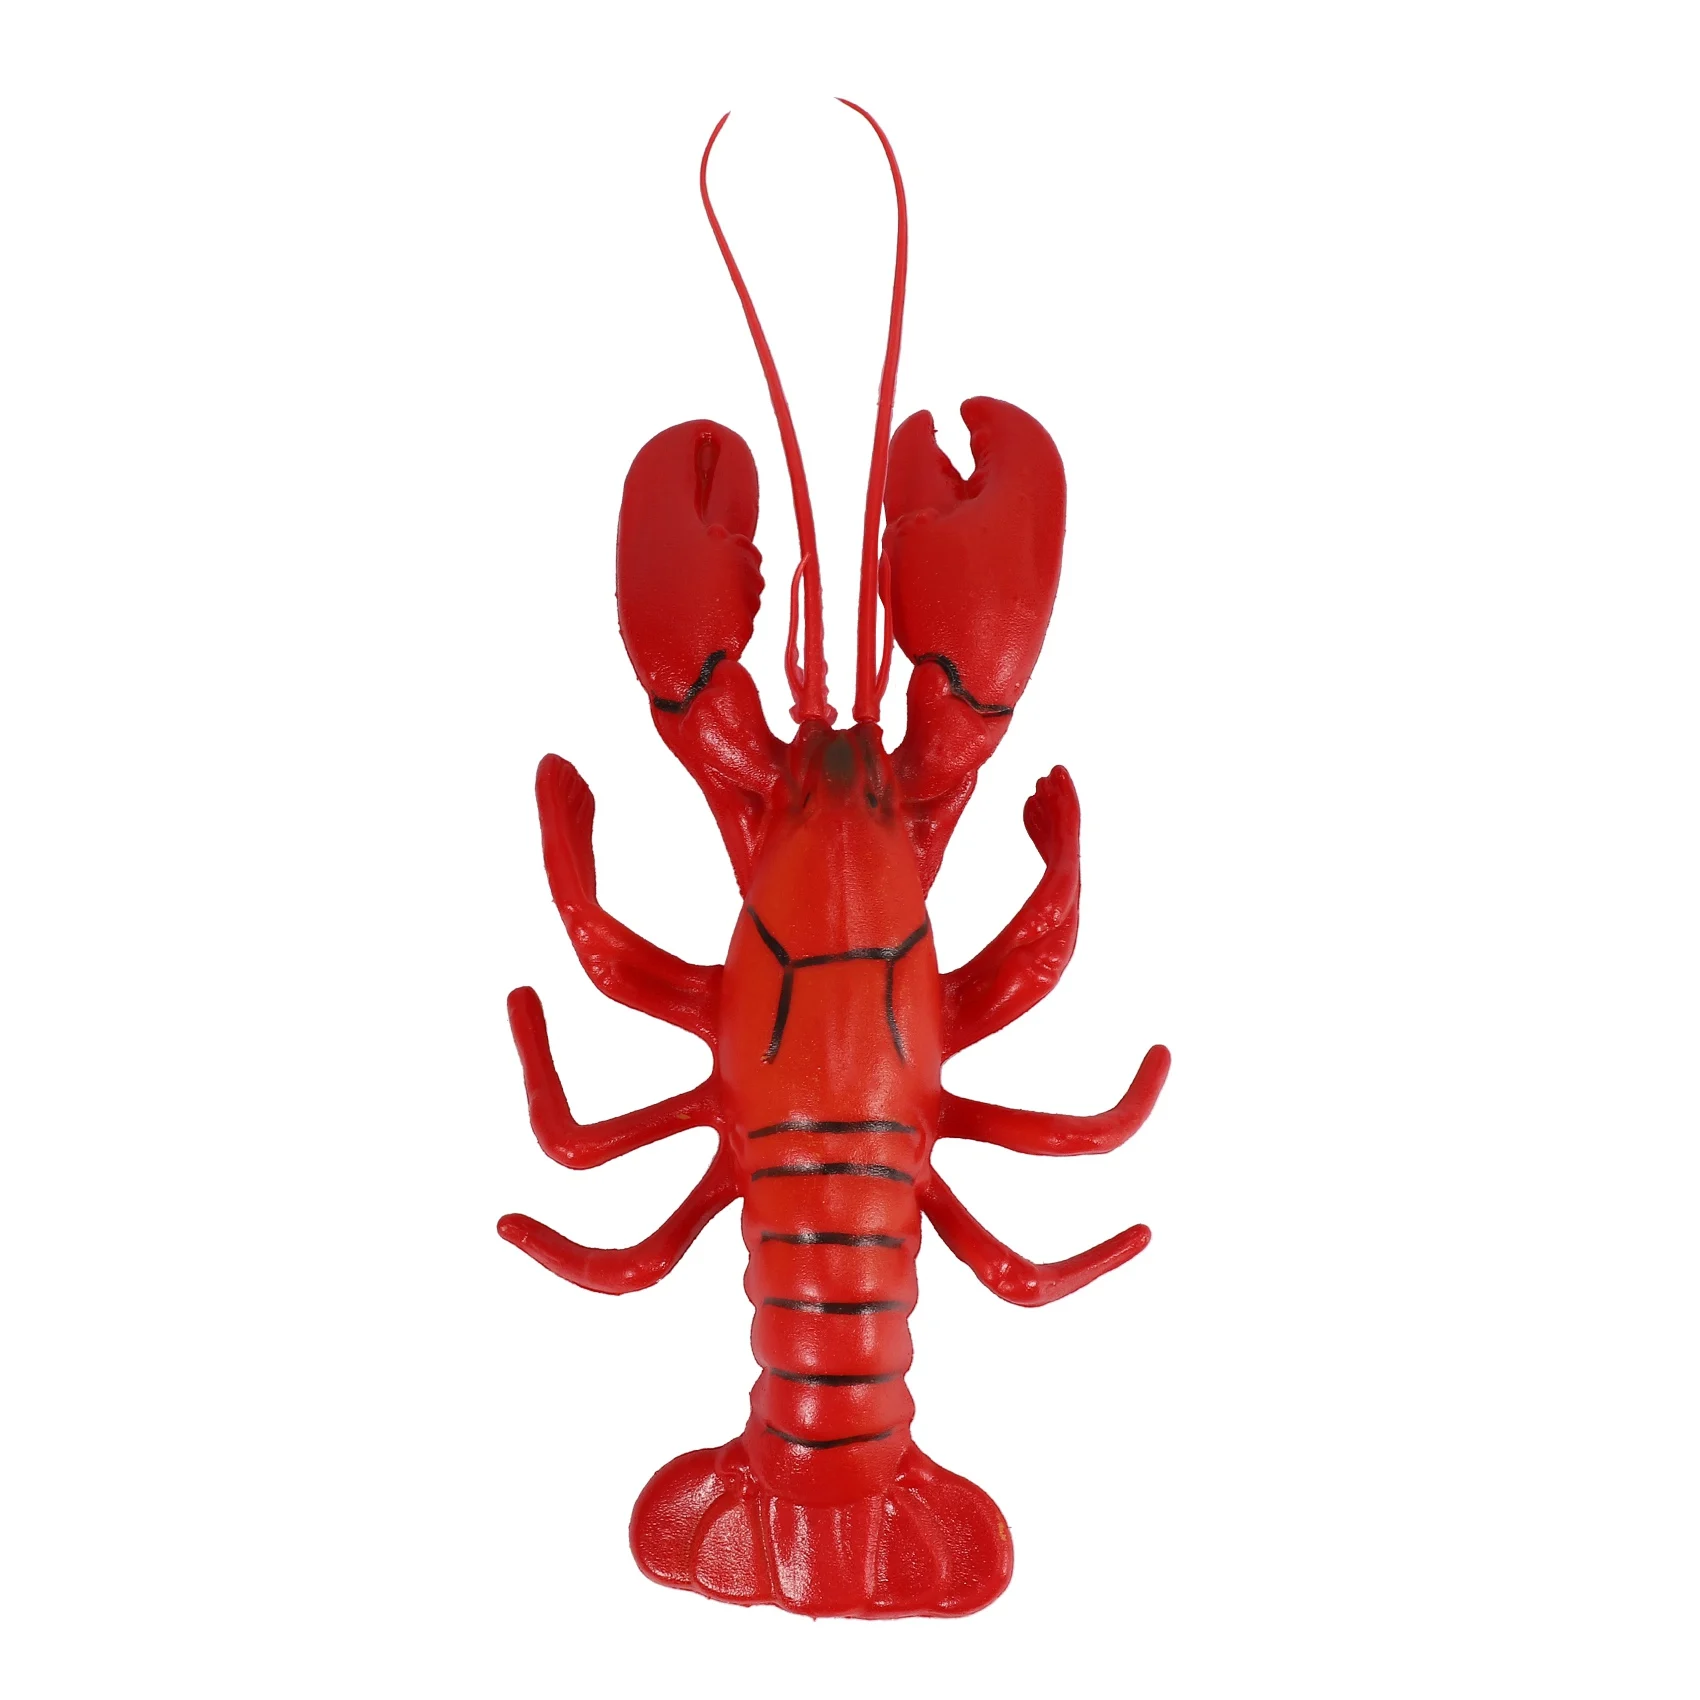 

12 x 5 inch Big Fake Lobster Model for Dispaly Artificial Marine Animals Decoration